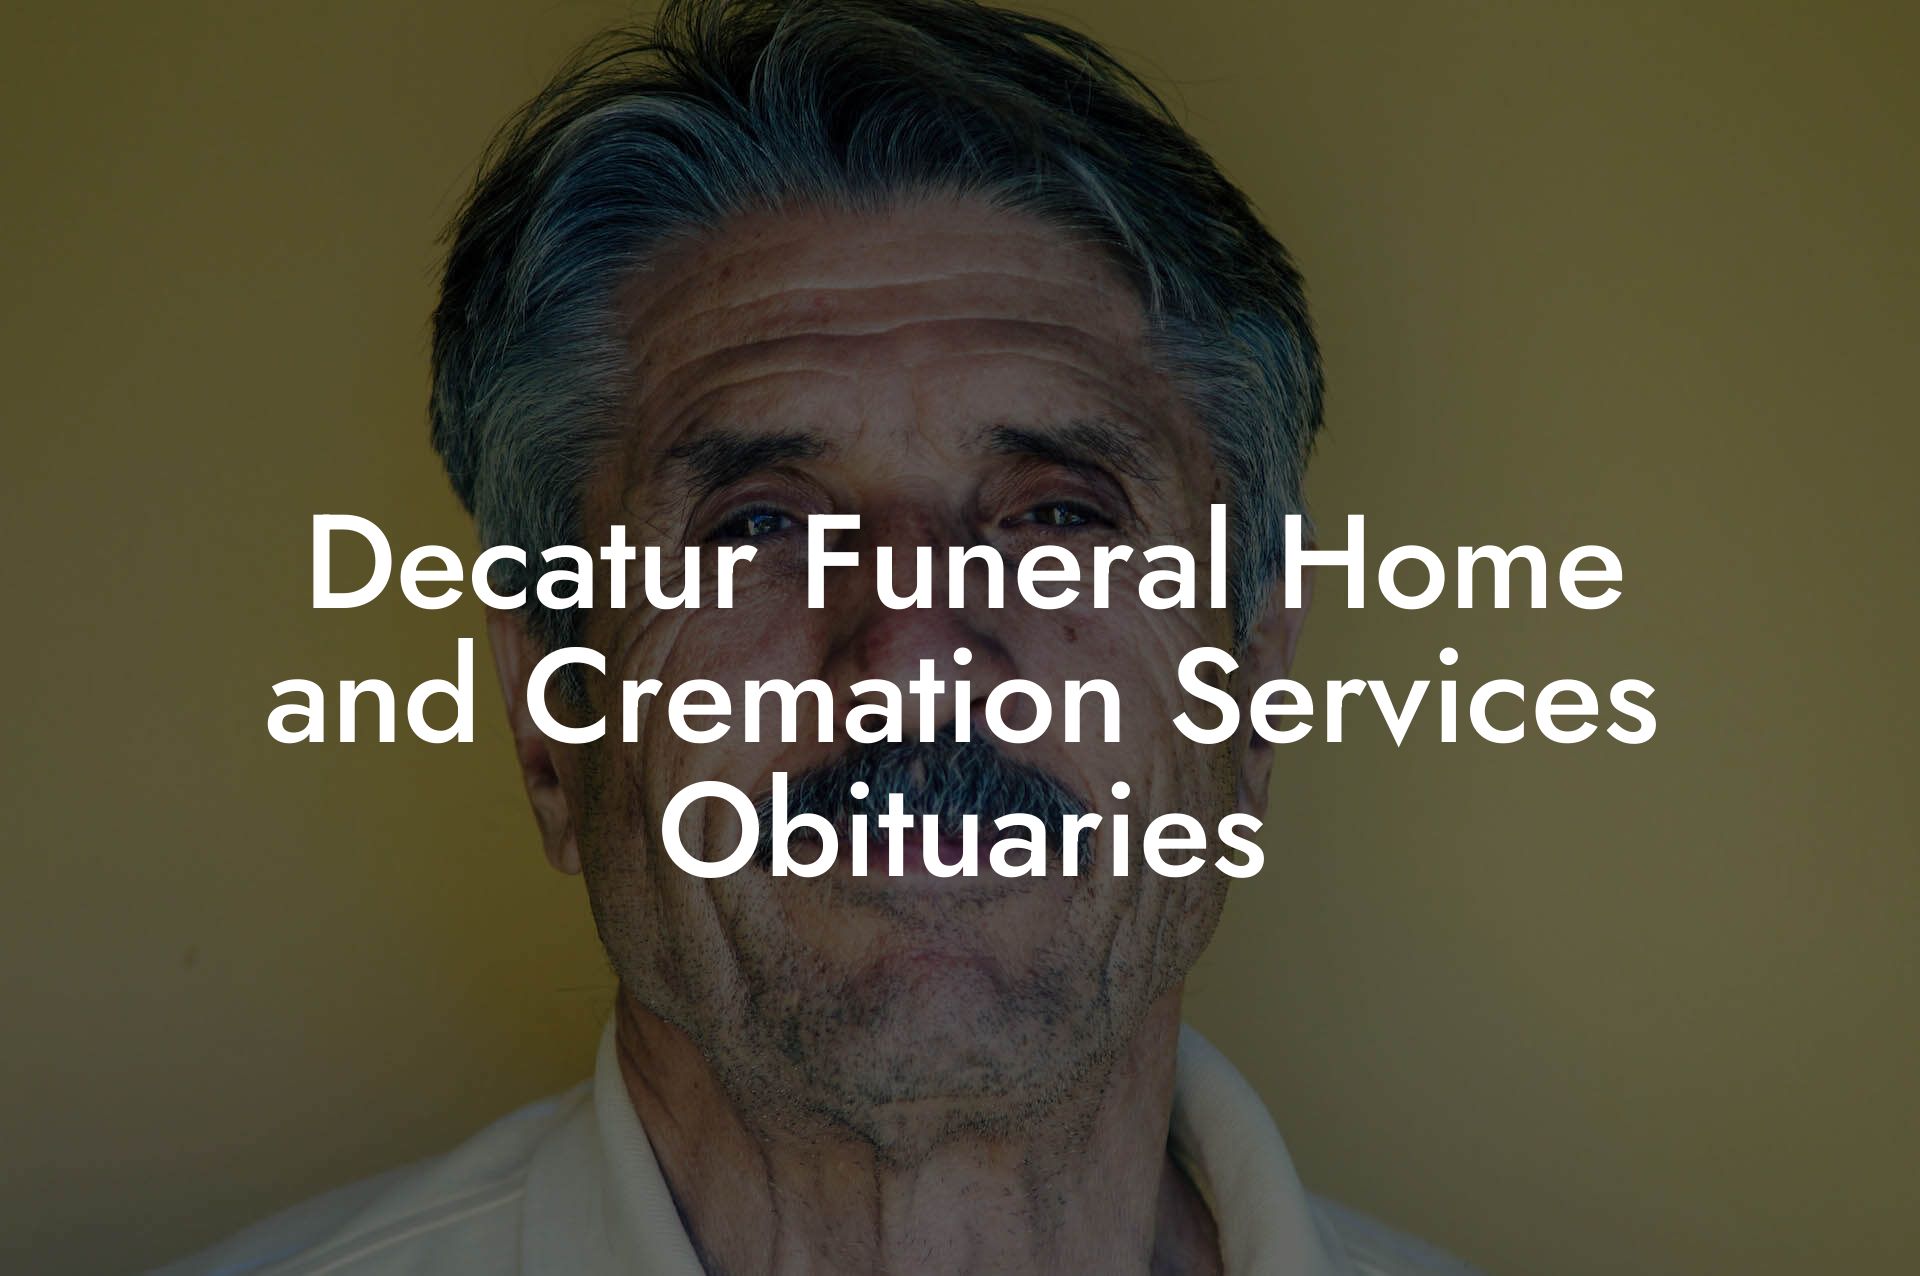 Decatur funeral home and cremation services obituaries